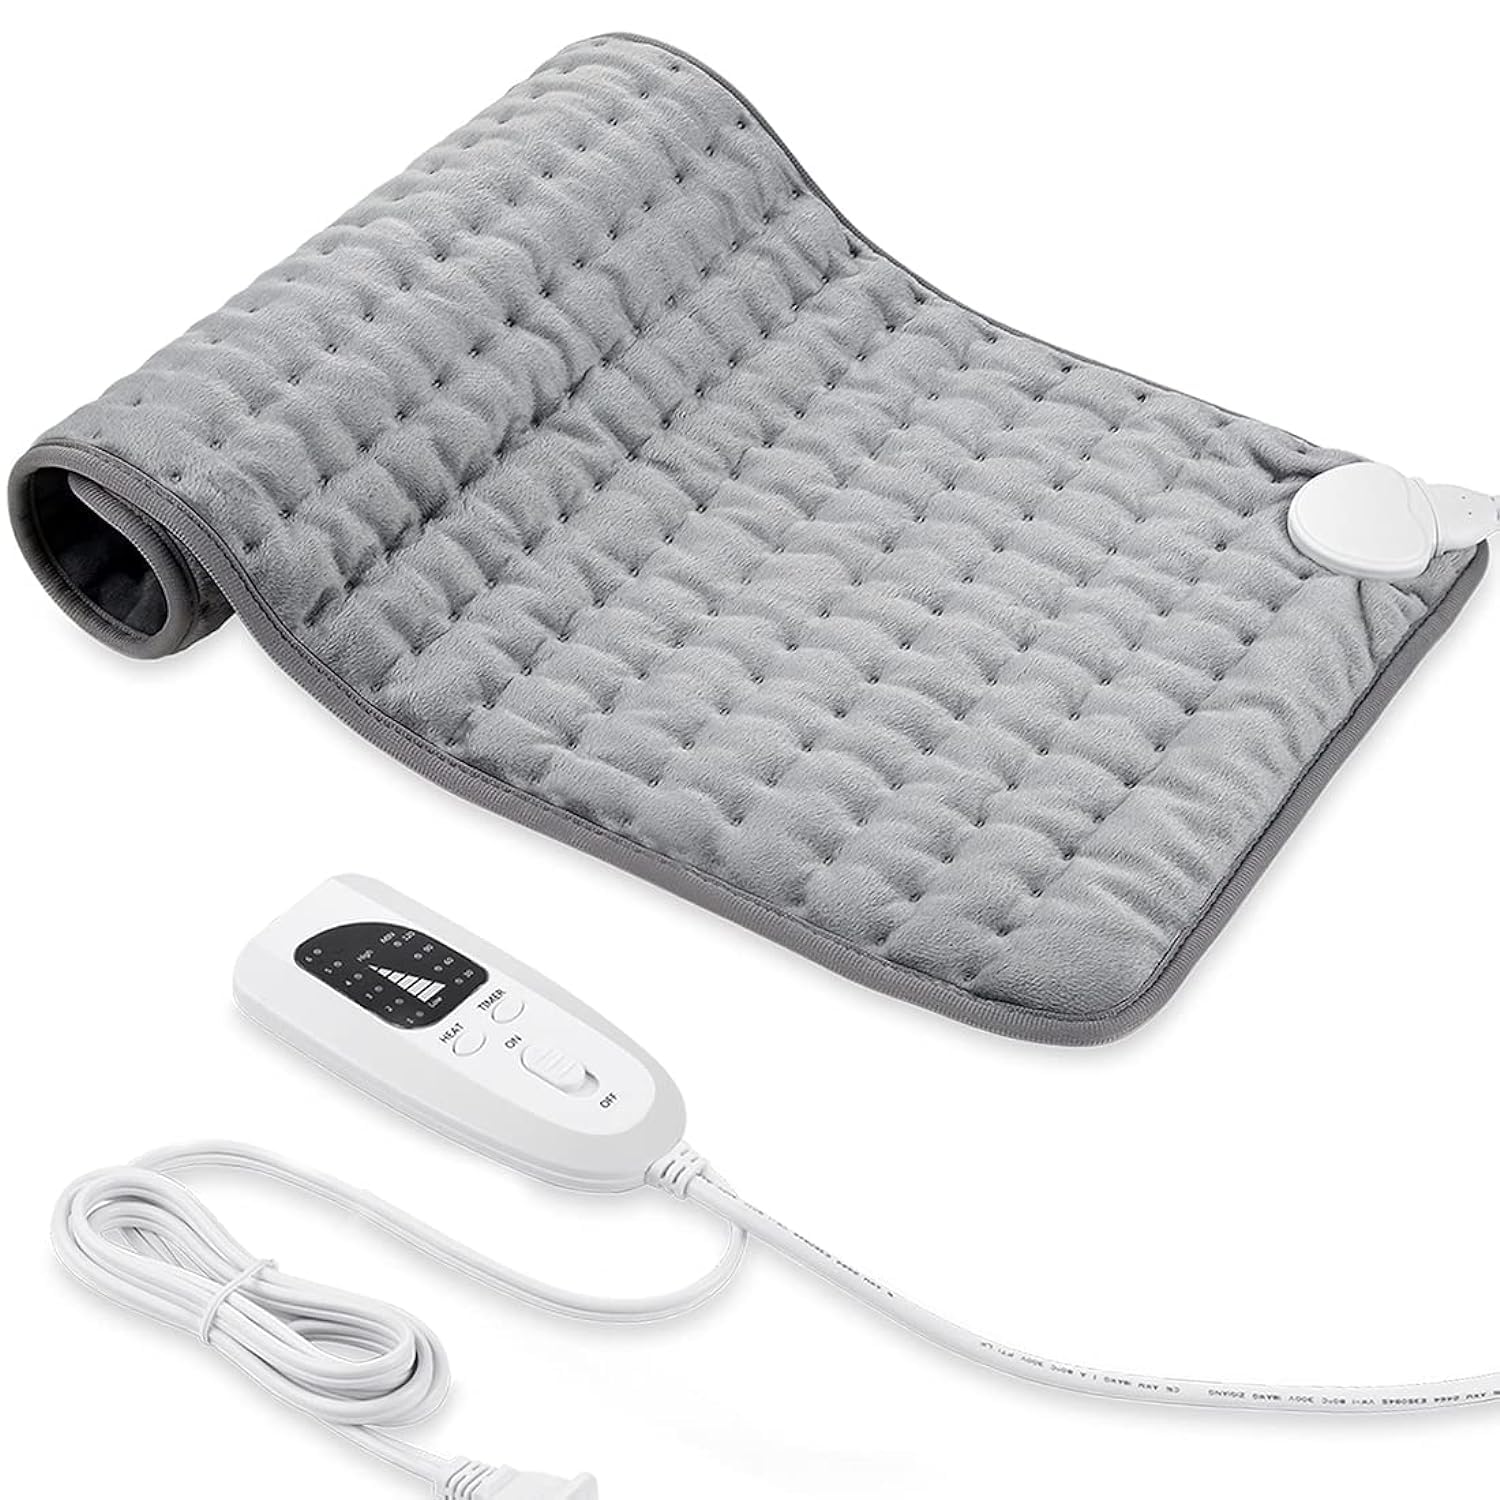 heating pad on stomach benefits